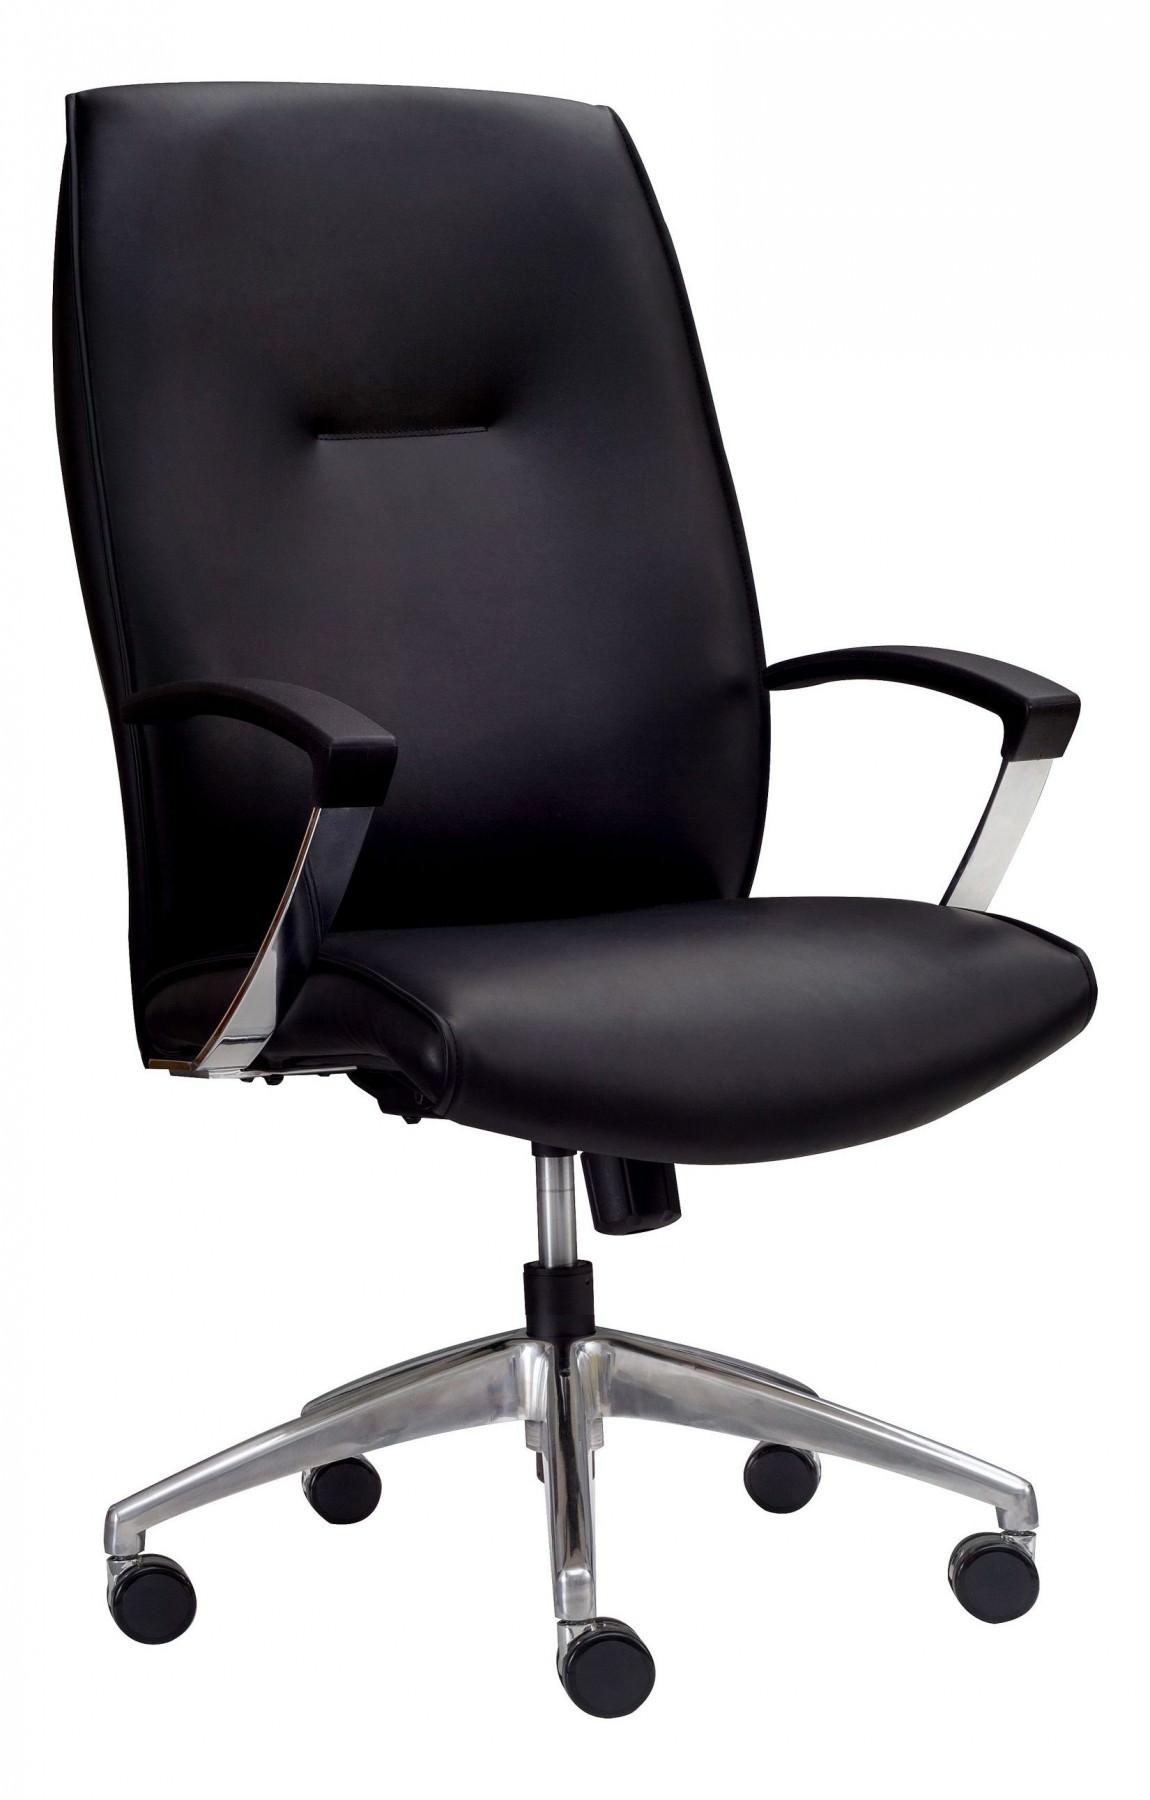 Leo 5001 Series High Back Conference Room Chair